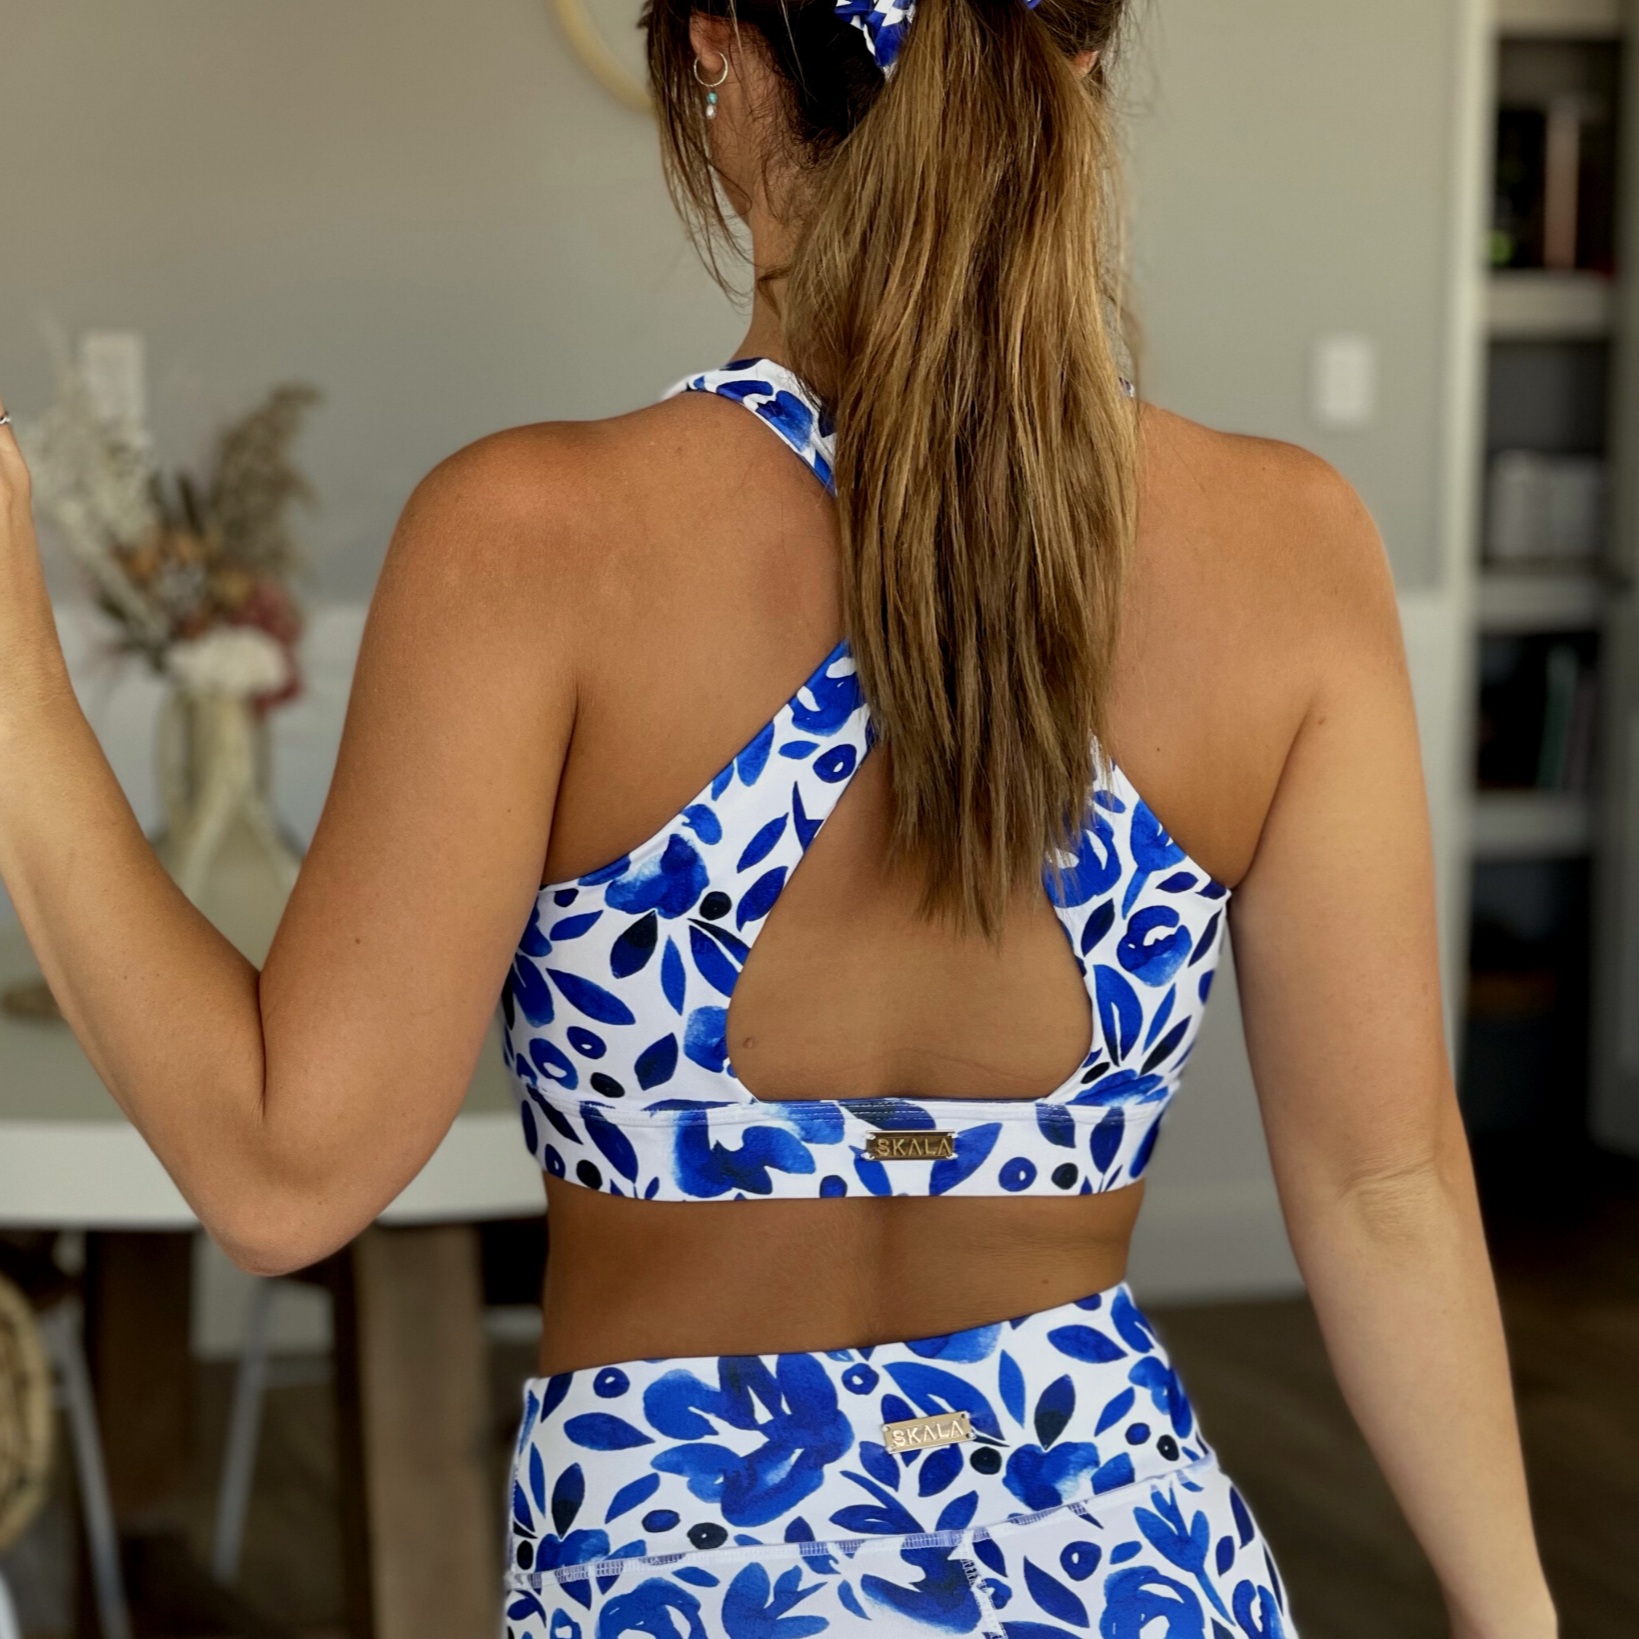 Australian ethical and sustainable activewear matching set made from recycled plastic materials. Blue and white floral sports bra.